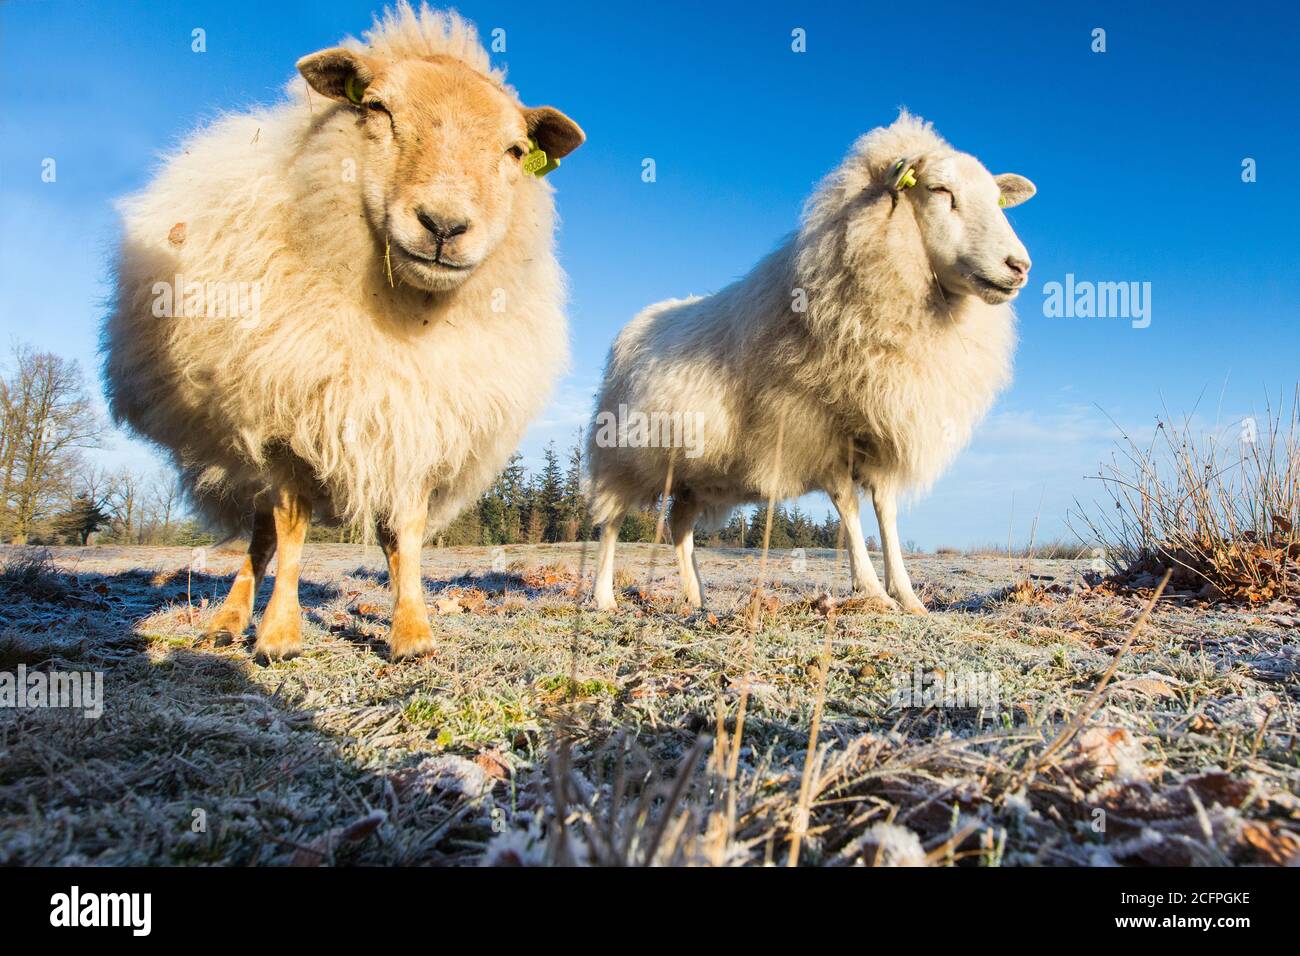 domestic sheep (Ovis ammon f. aries), ina meadow with hoar frost in winter, Netherlands, Drenthe, Drents-Friese Wold Stock Photo